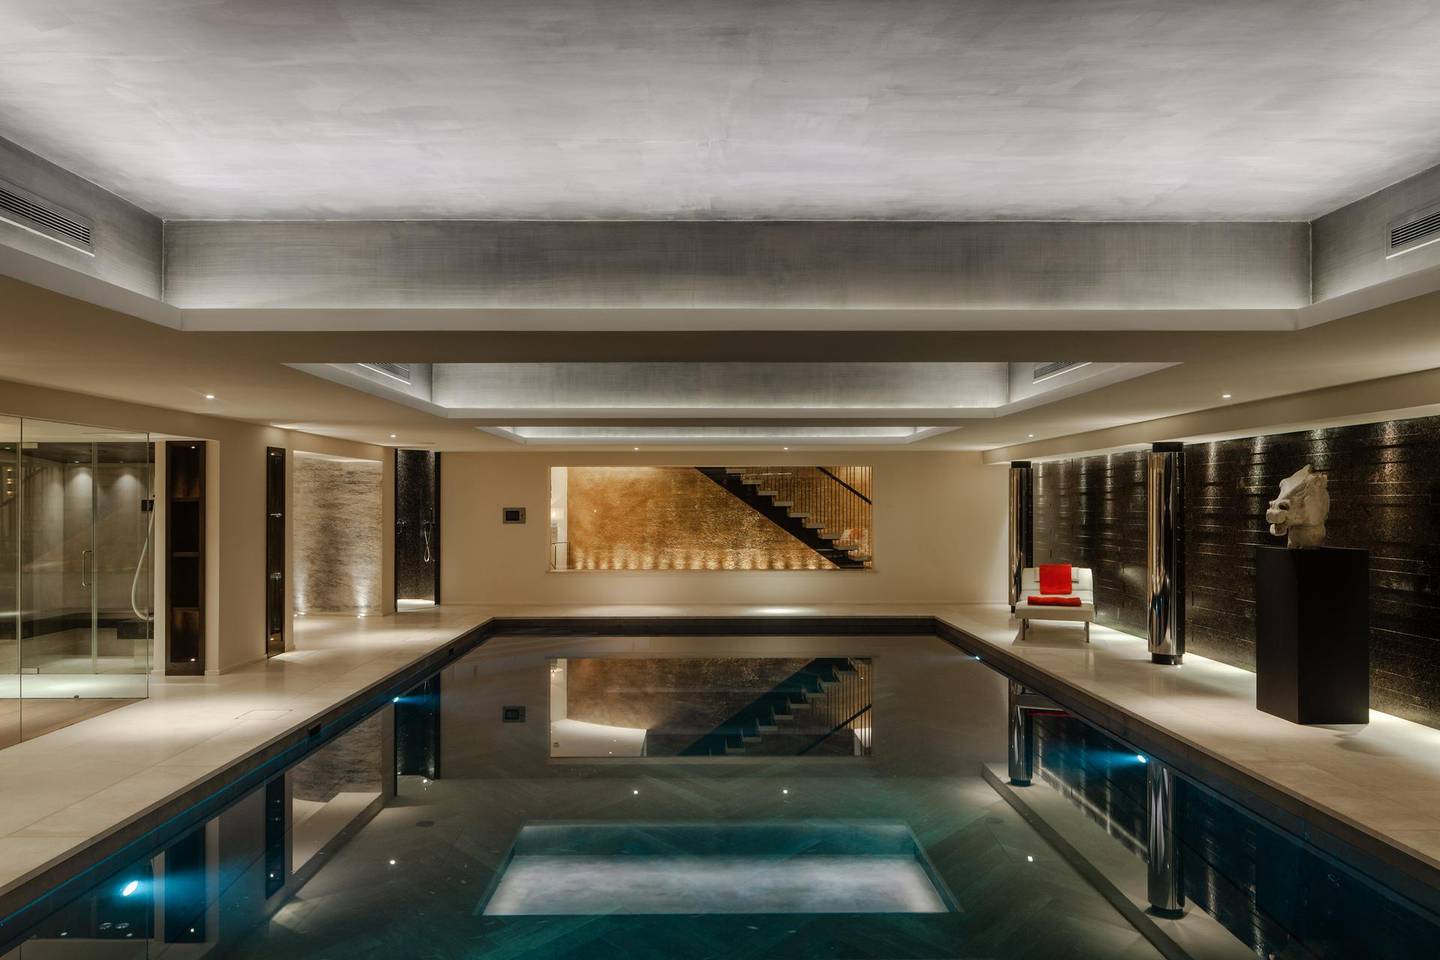 The underground indoor swimming pool boasts a floor which rises up to create a spacious level entertainment space. Courtesy Savills